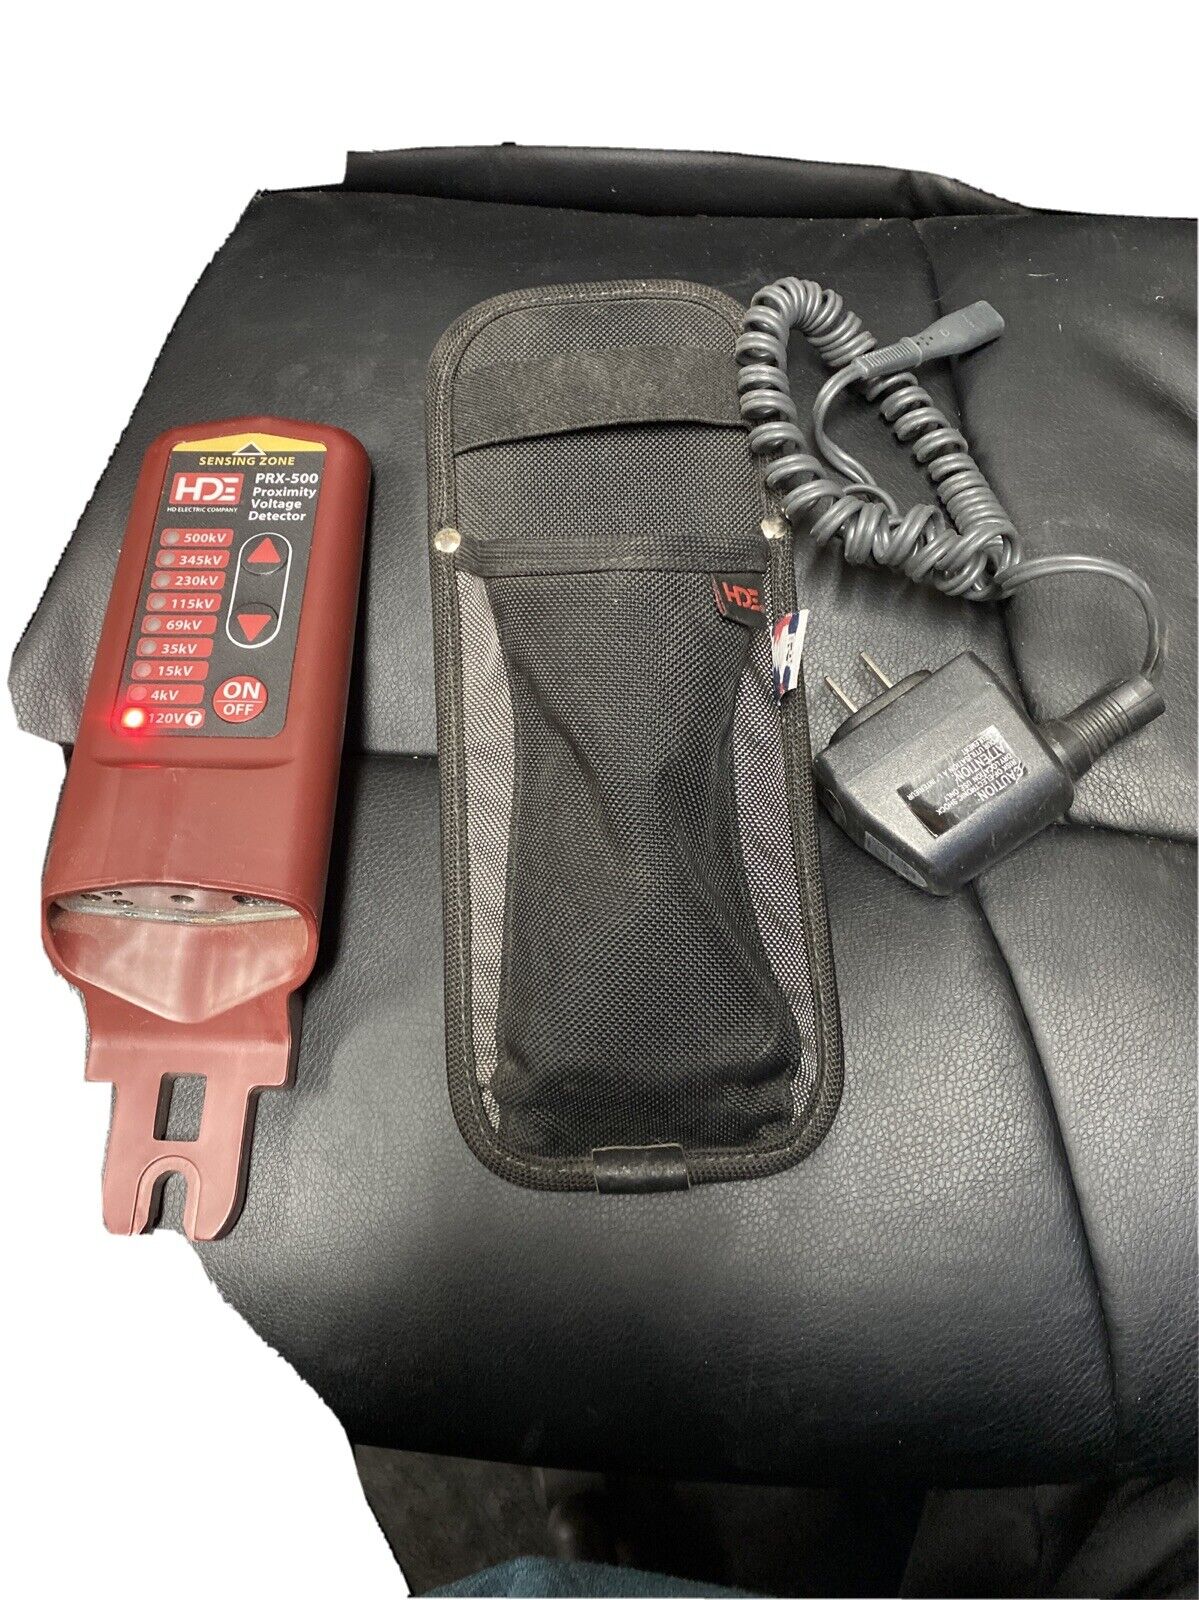 HDE PRX-500 Proximity Voltage Detector w/ Holster & Vehicle Outlet Charger